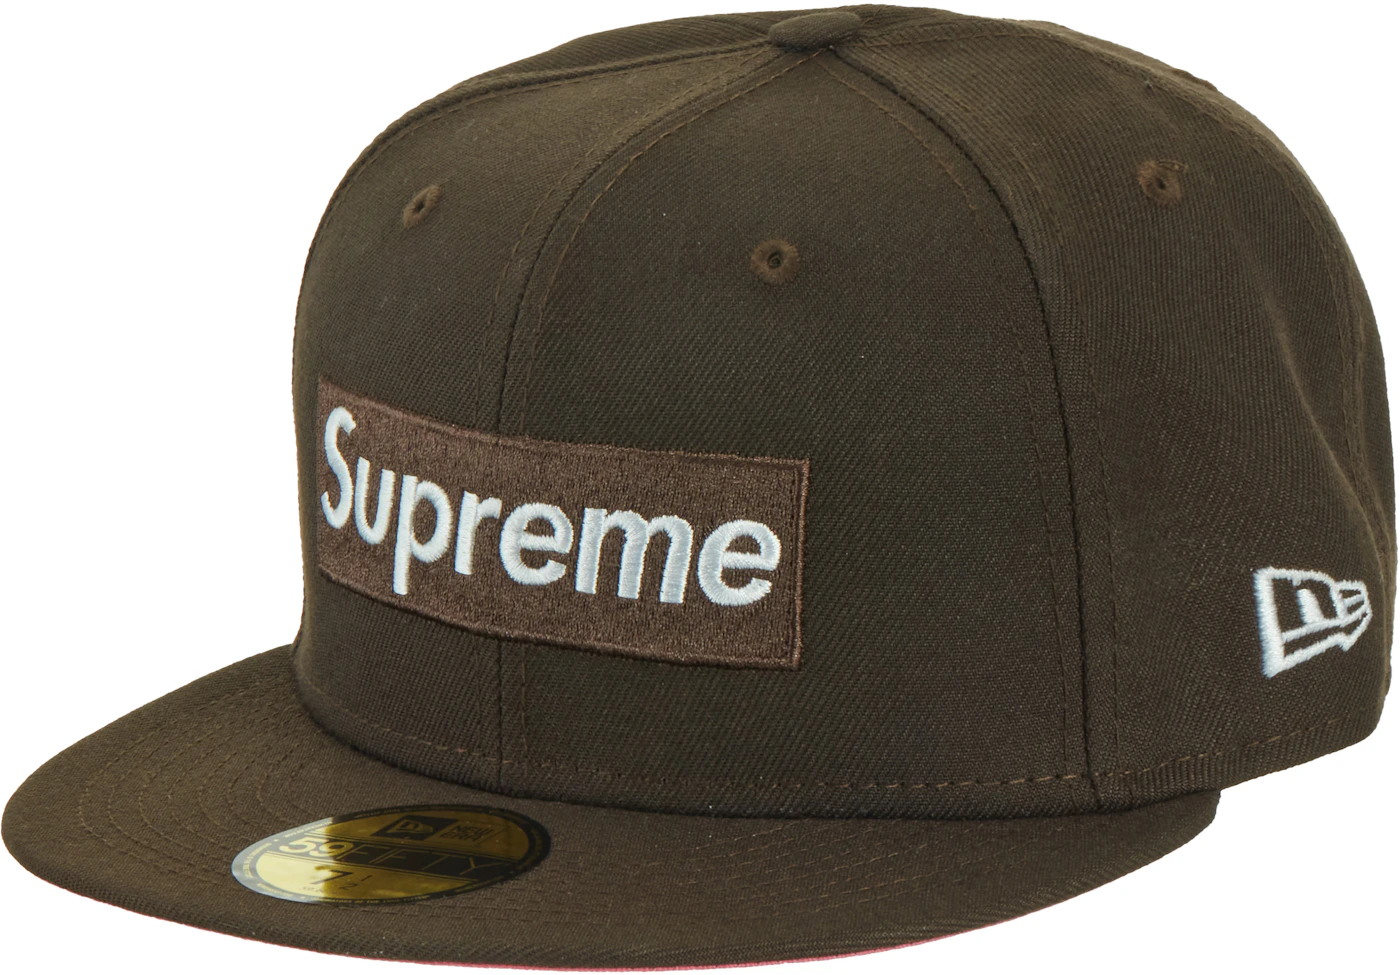 Shop Original Supreme Cap Men with great discounts and prices